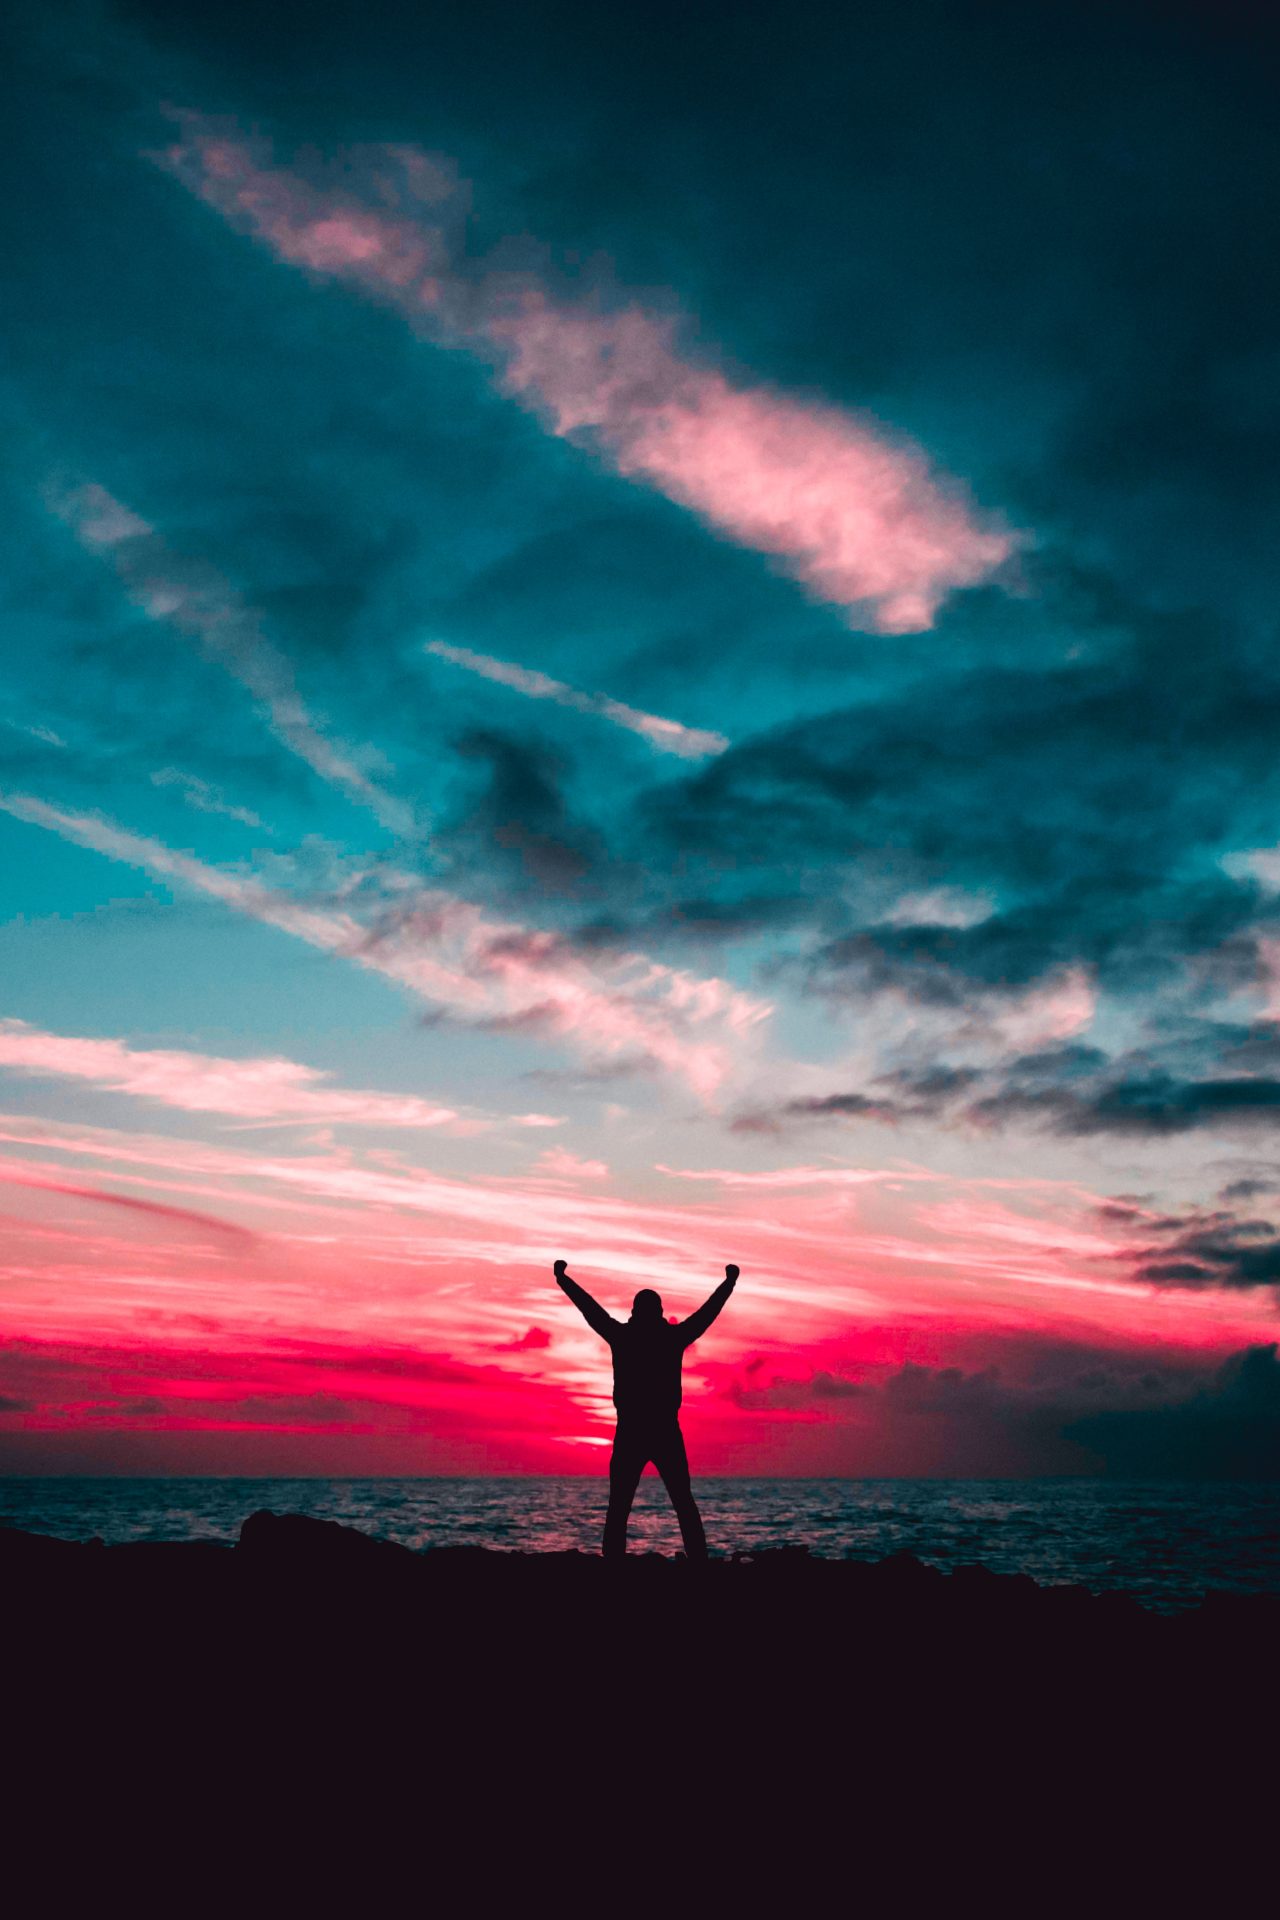 Person with arms raised as if in victory standing in front of a vibrant pink and blue sunrise or sunset over water.